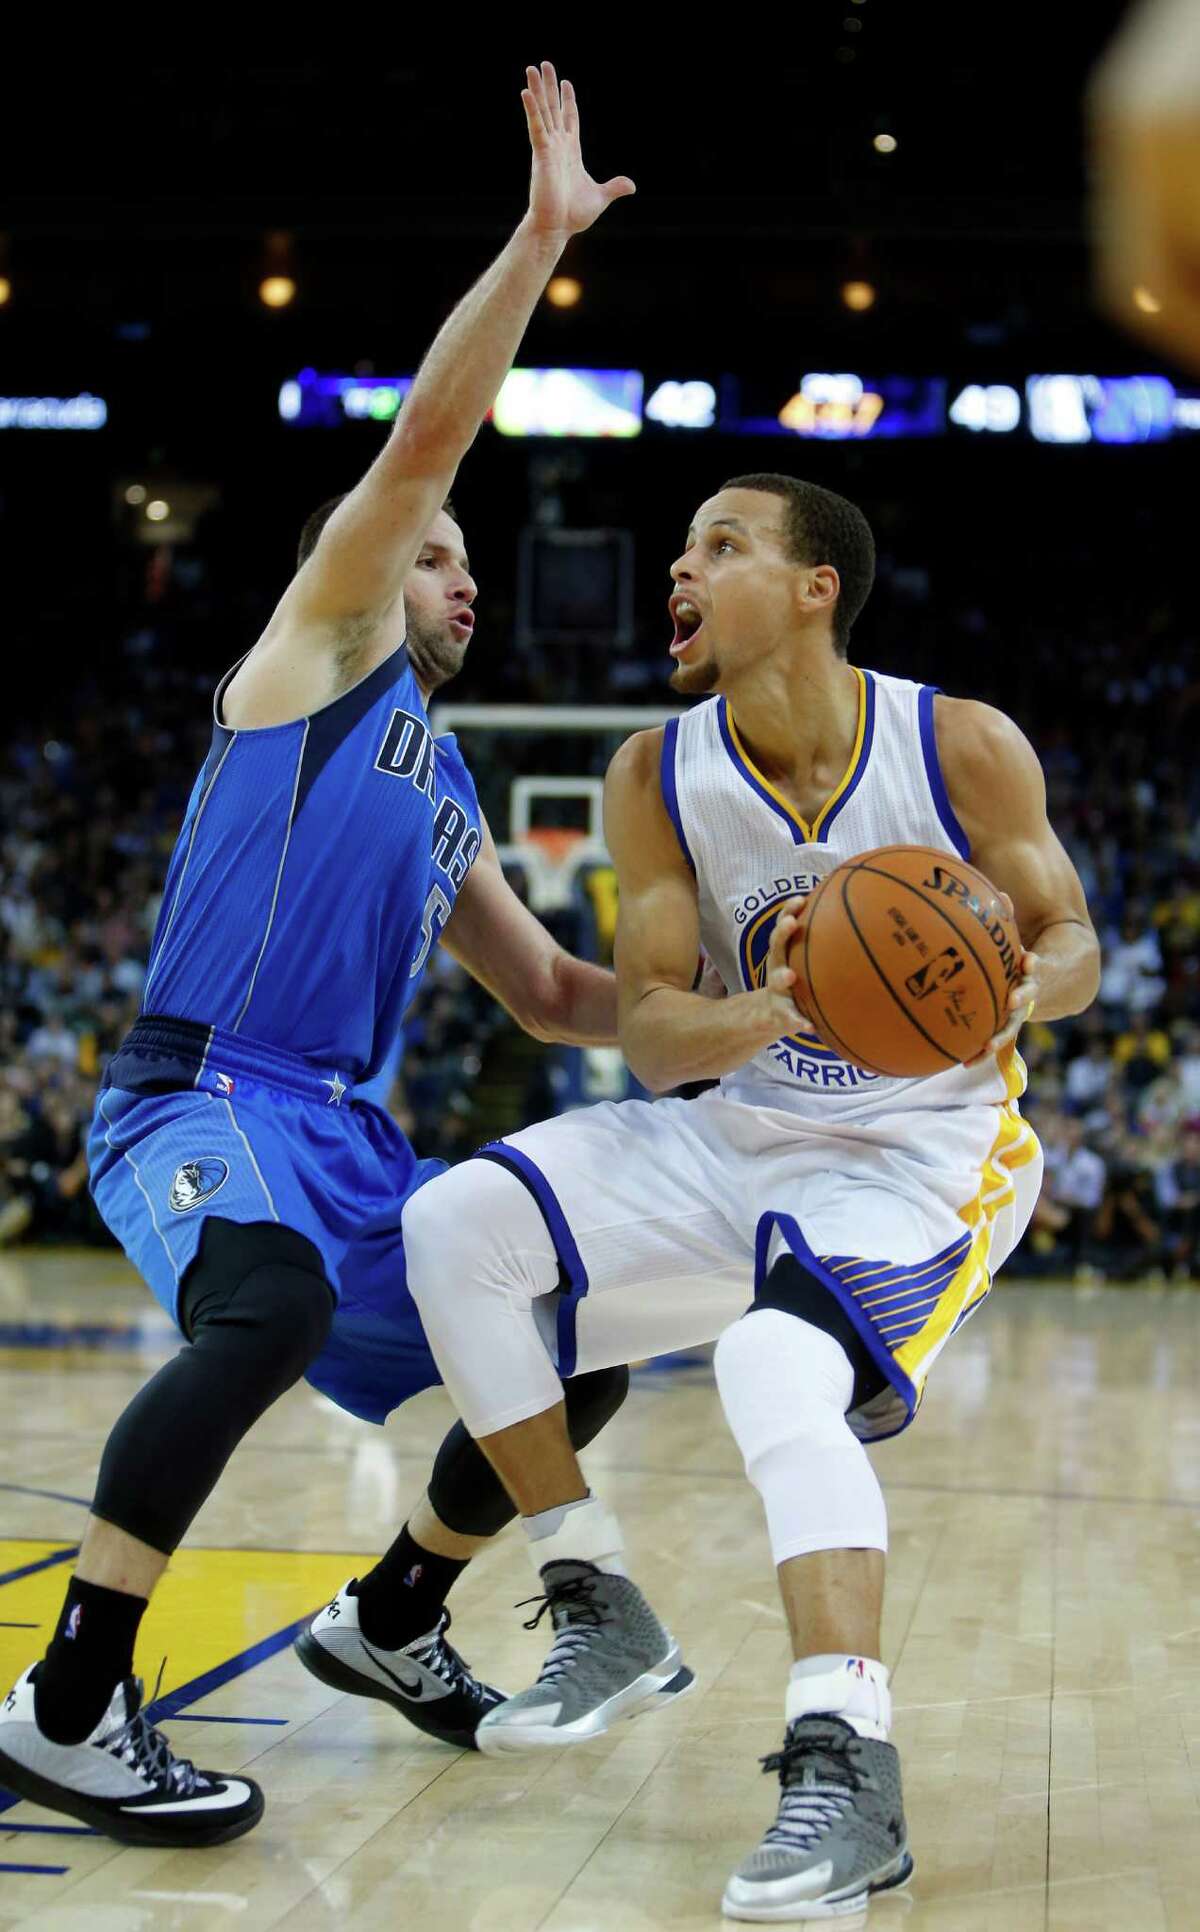 Golden State Warriors' Stephen Curry looks to score against Dallas Mavericks' Jose Juan Barea in 2nd quarter during NBA game at Oracle Arena in Oakland, Calif. on Wednesday, February 4, 2015.